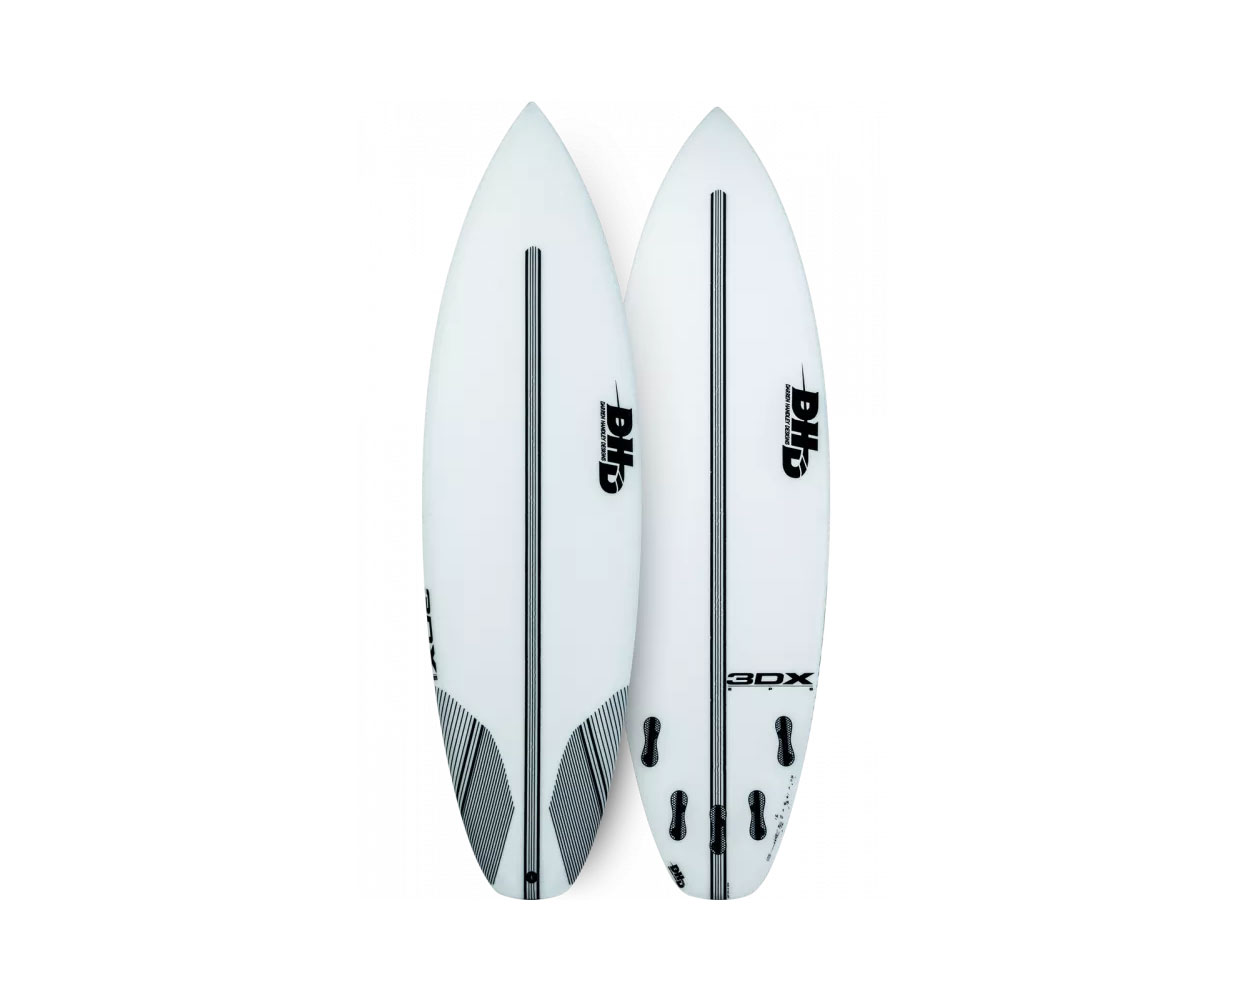 Dhd eps core series 3dx fcs surfboard